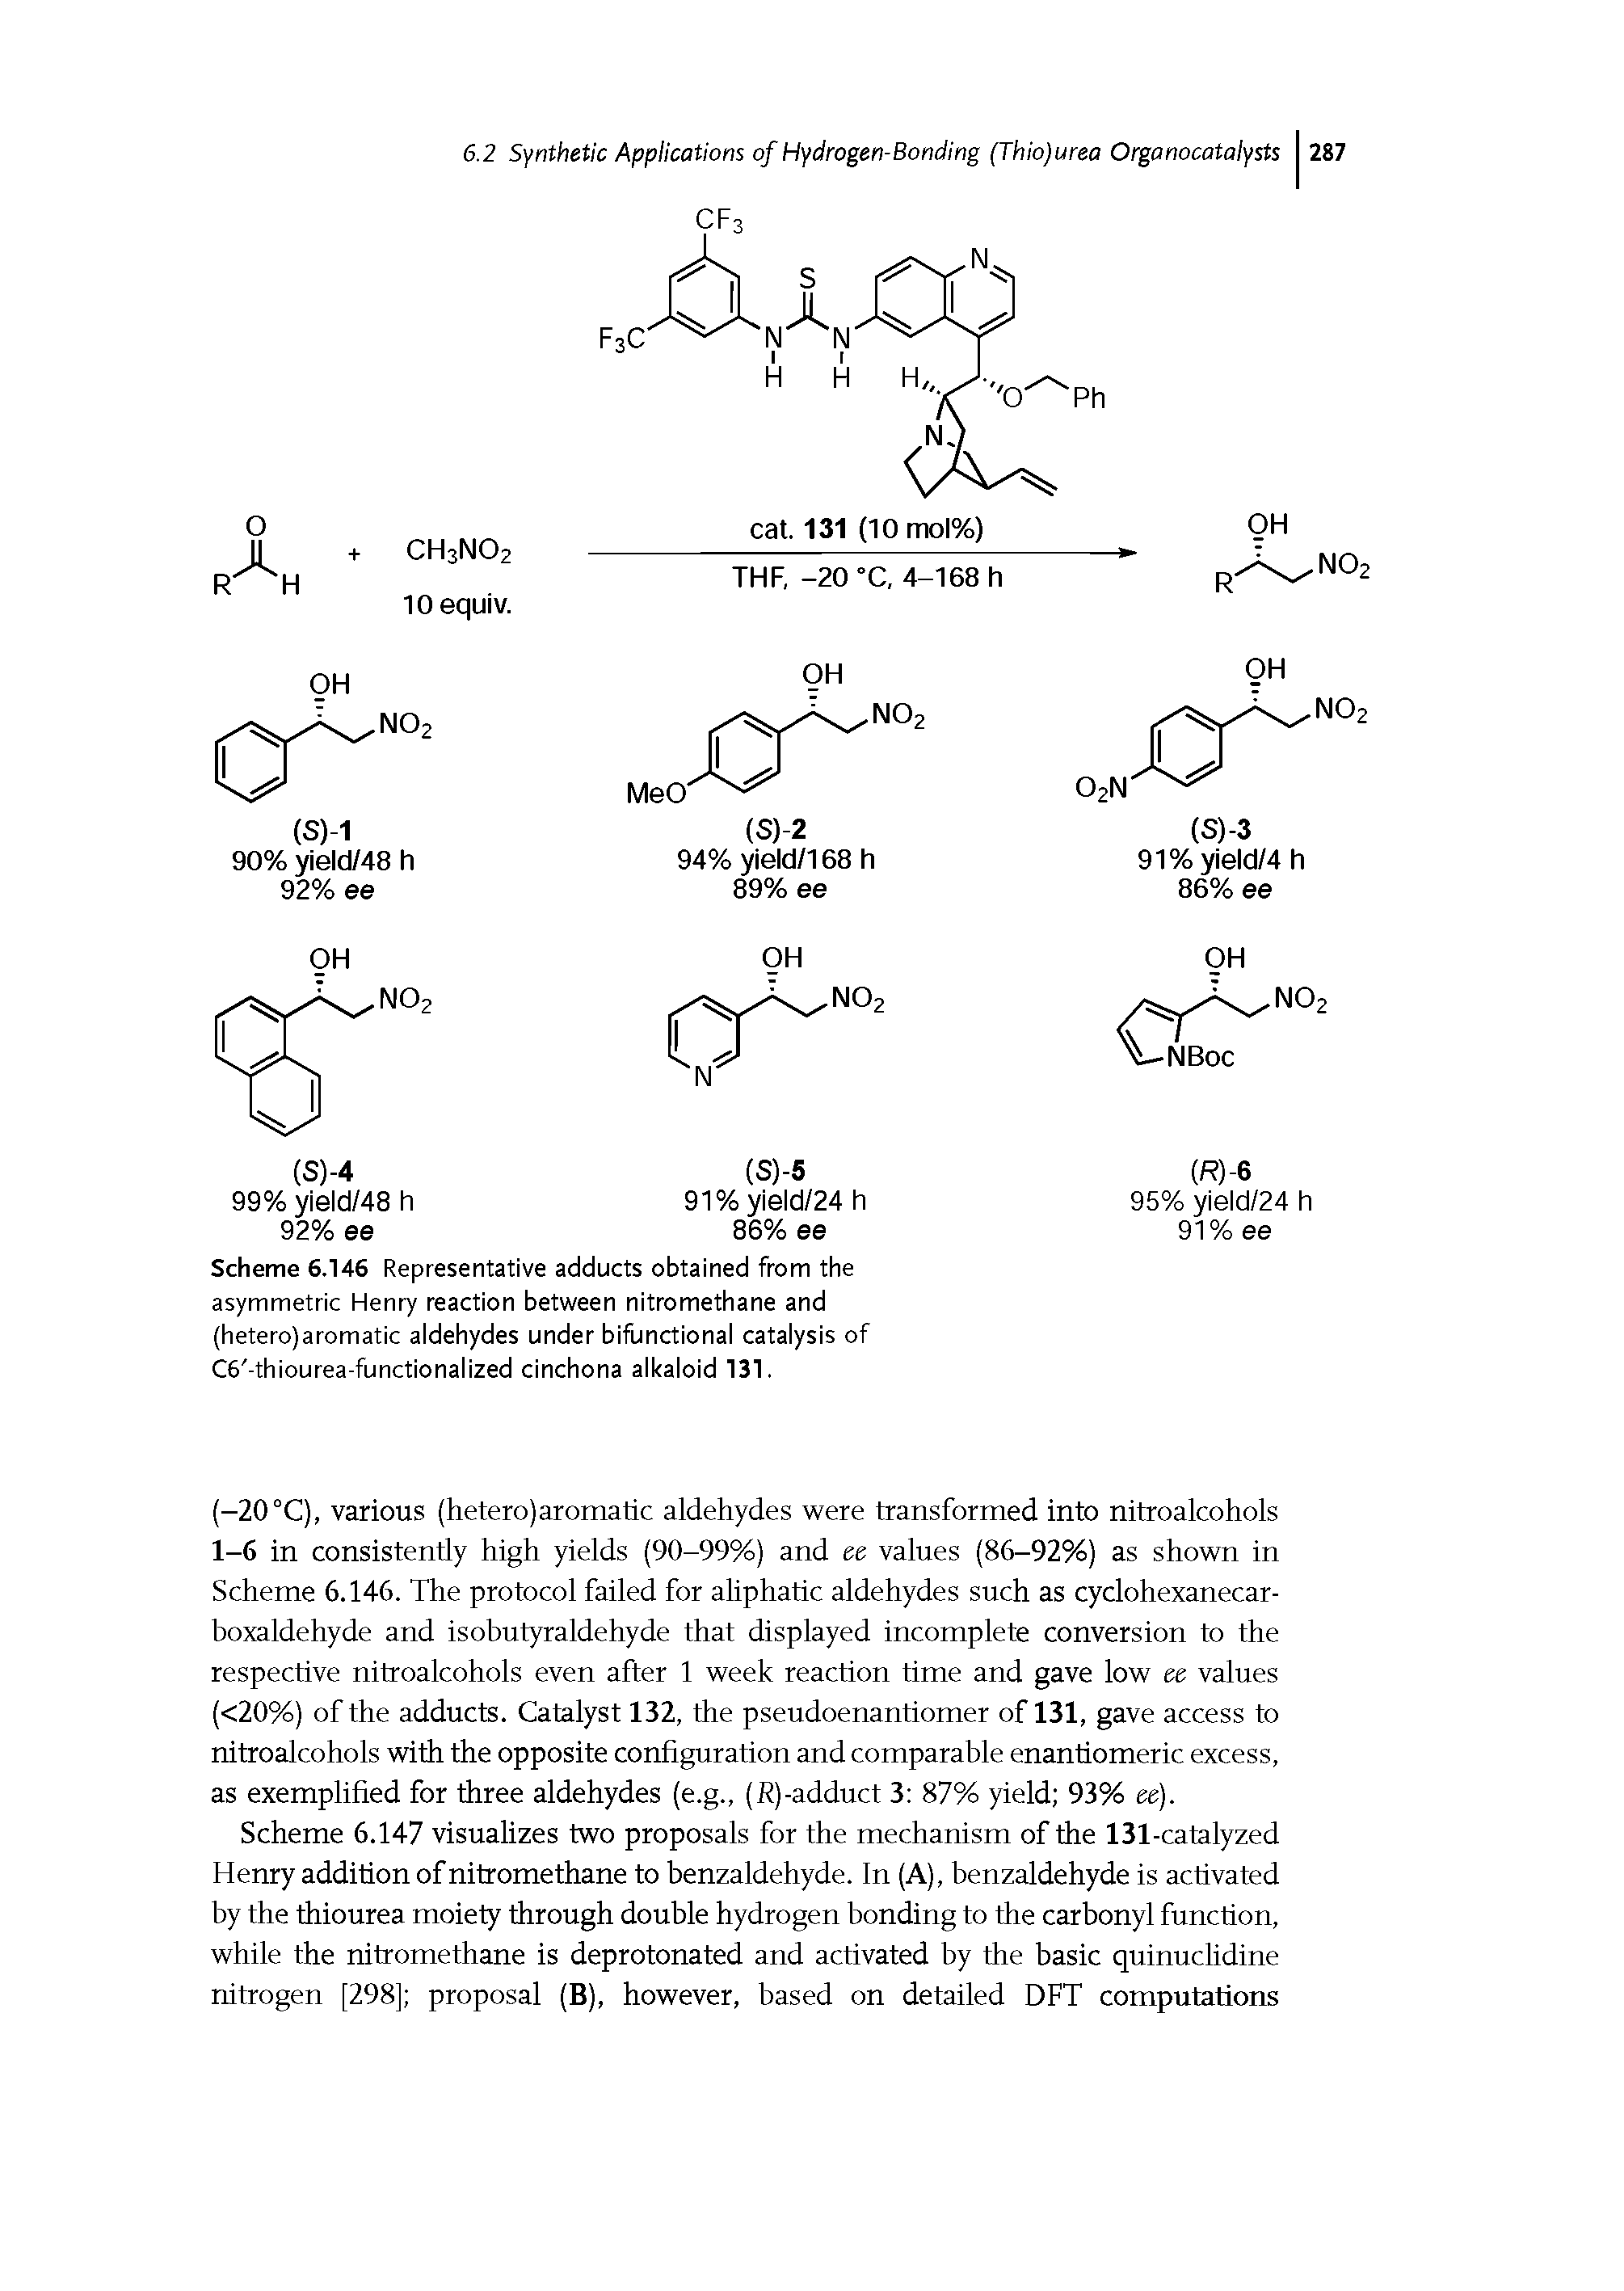 Scheme 6.146 Representative adducts obtained from the asymmetric Henry reaction between nitromethane and (hetero)aromatic aldehydes under bifunctional catalysis of C6 -thiourea-functionalized cinchona alkaloid 131.